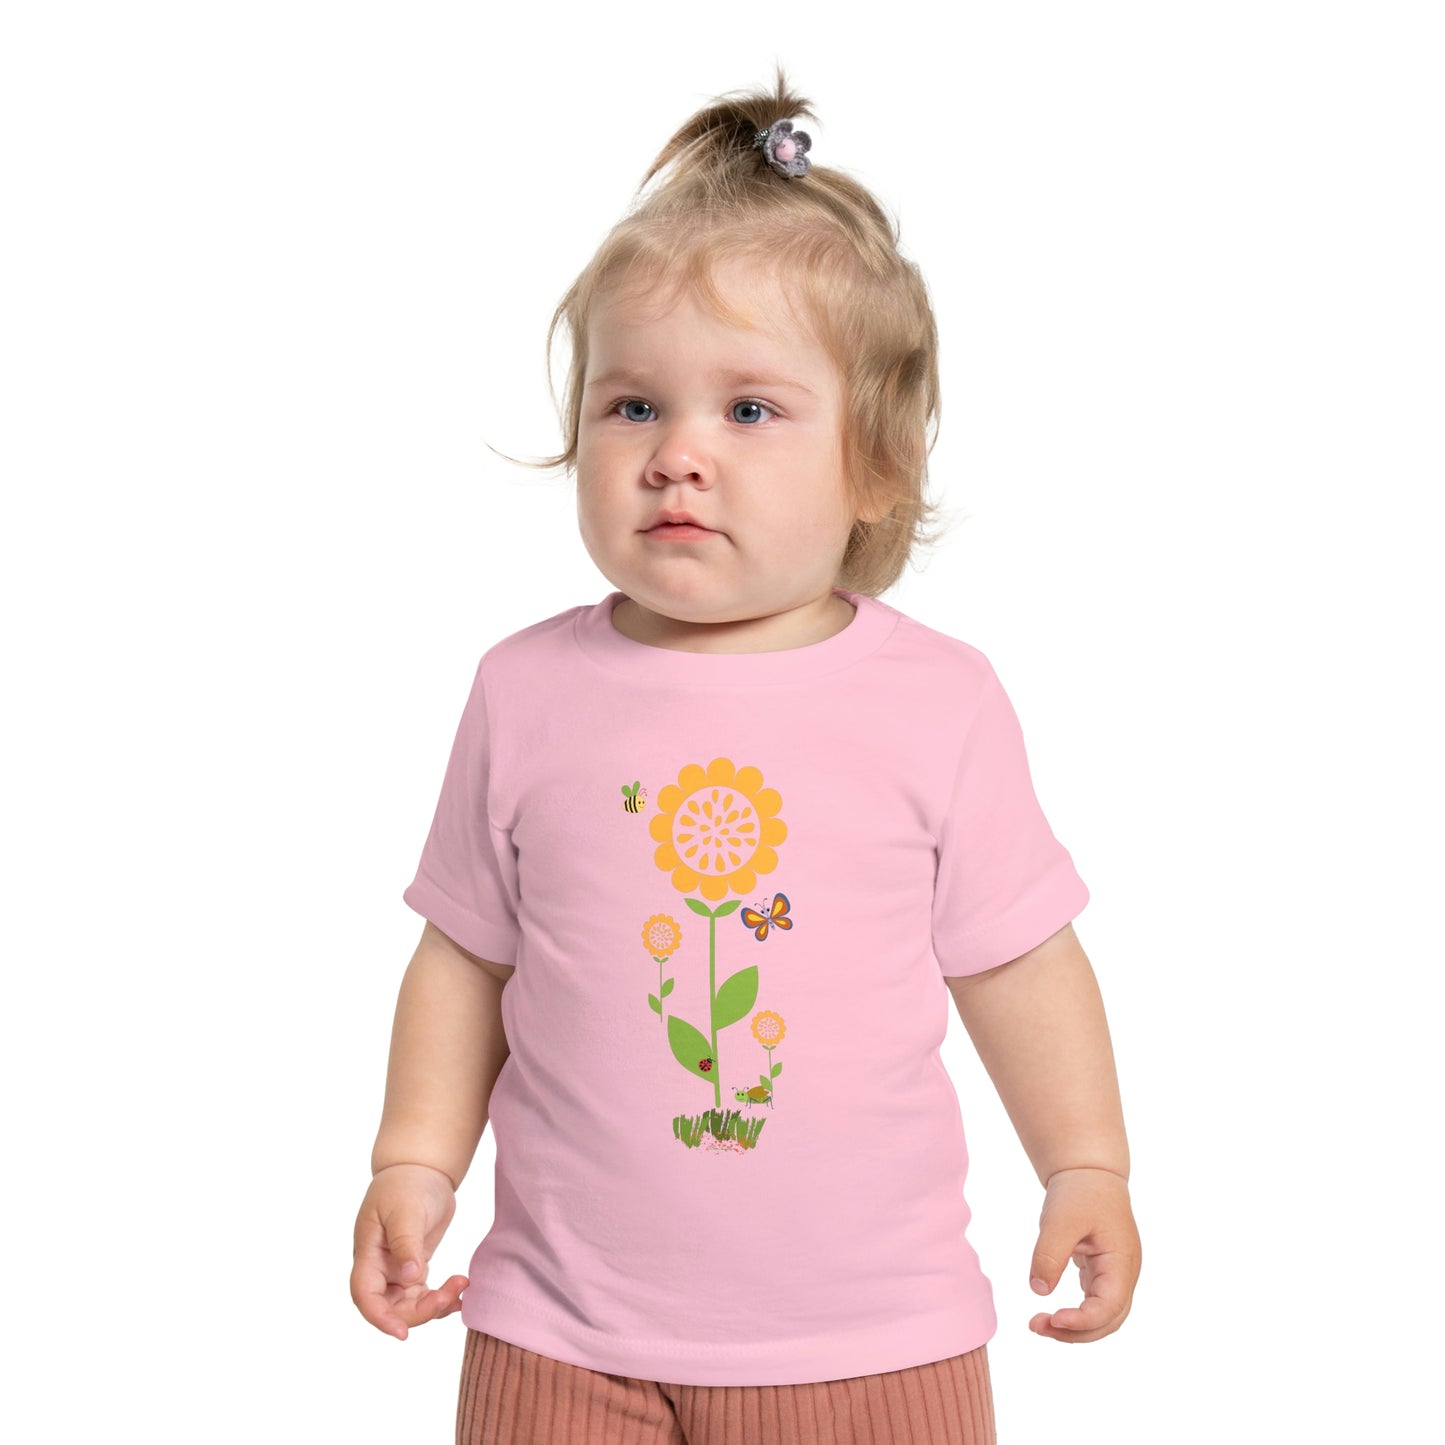 Mock up of a toddler wearing the Pink t-shirt